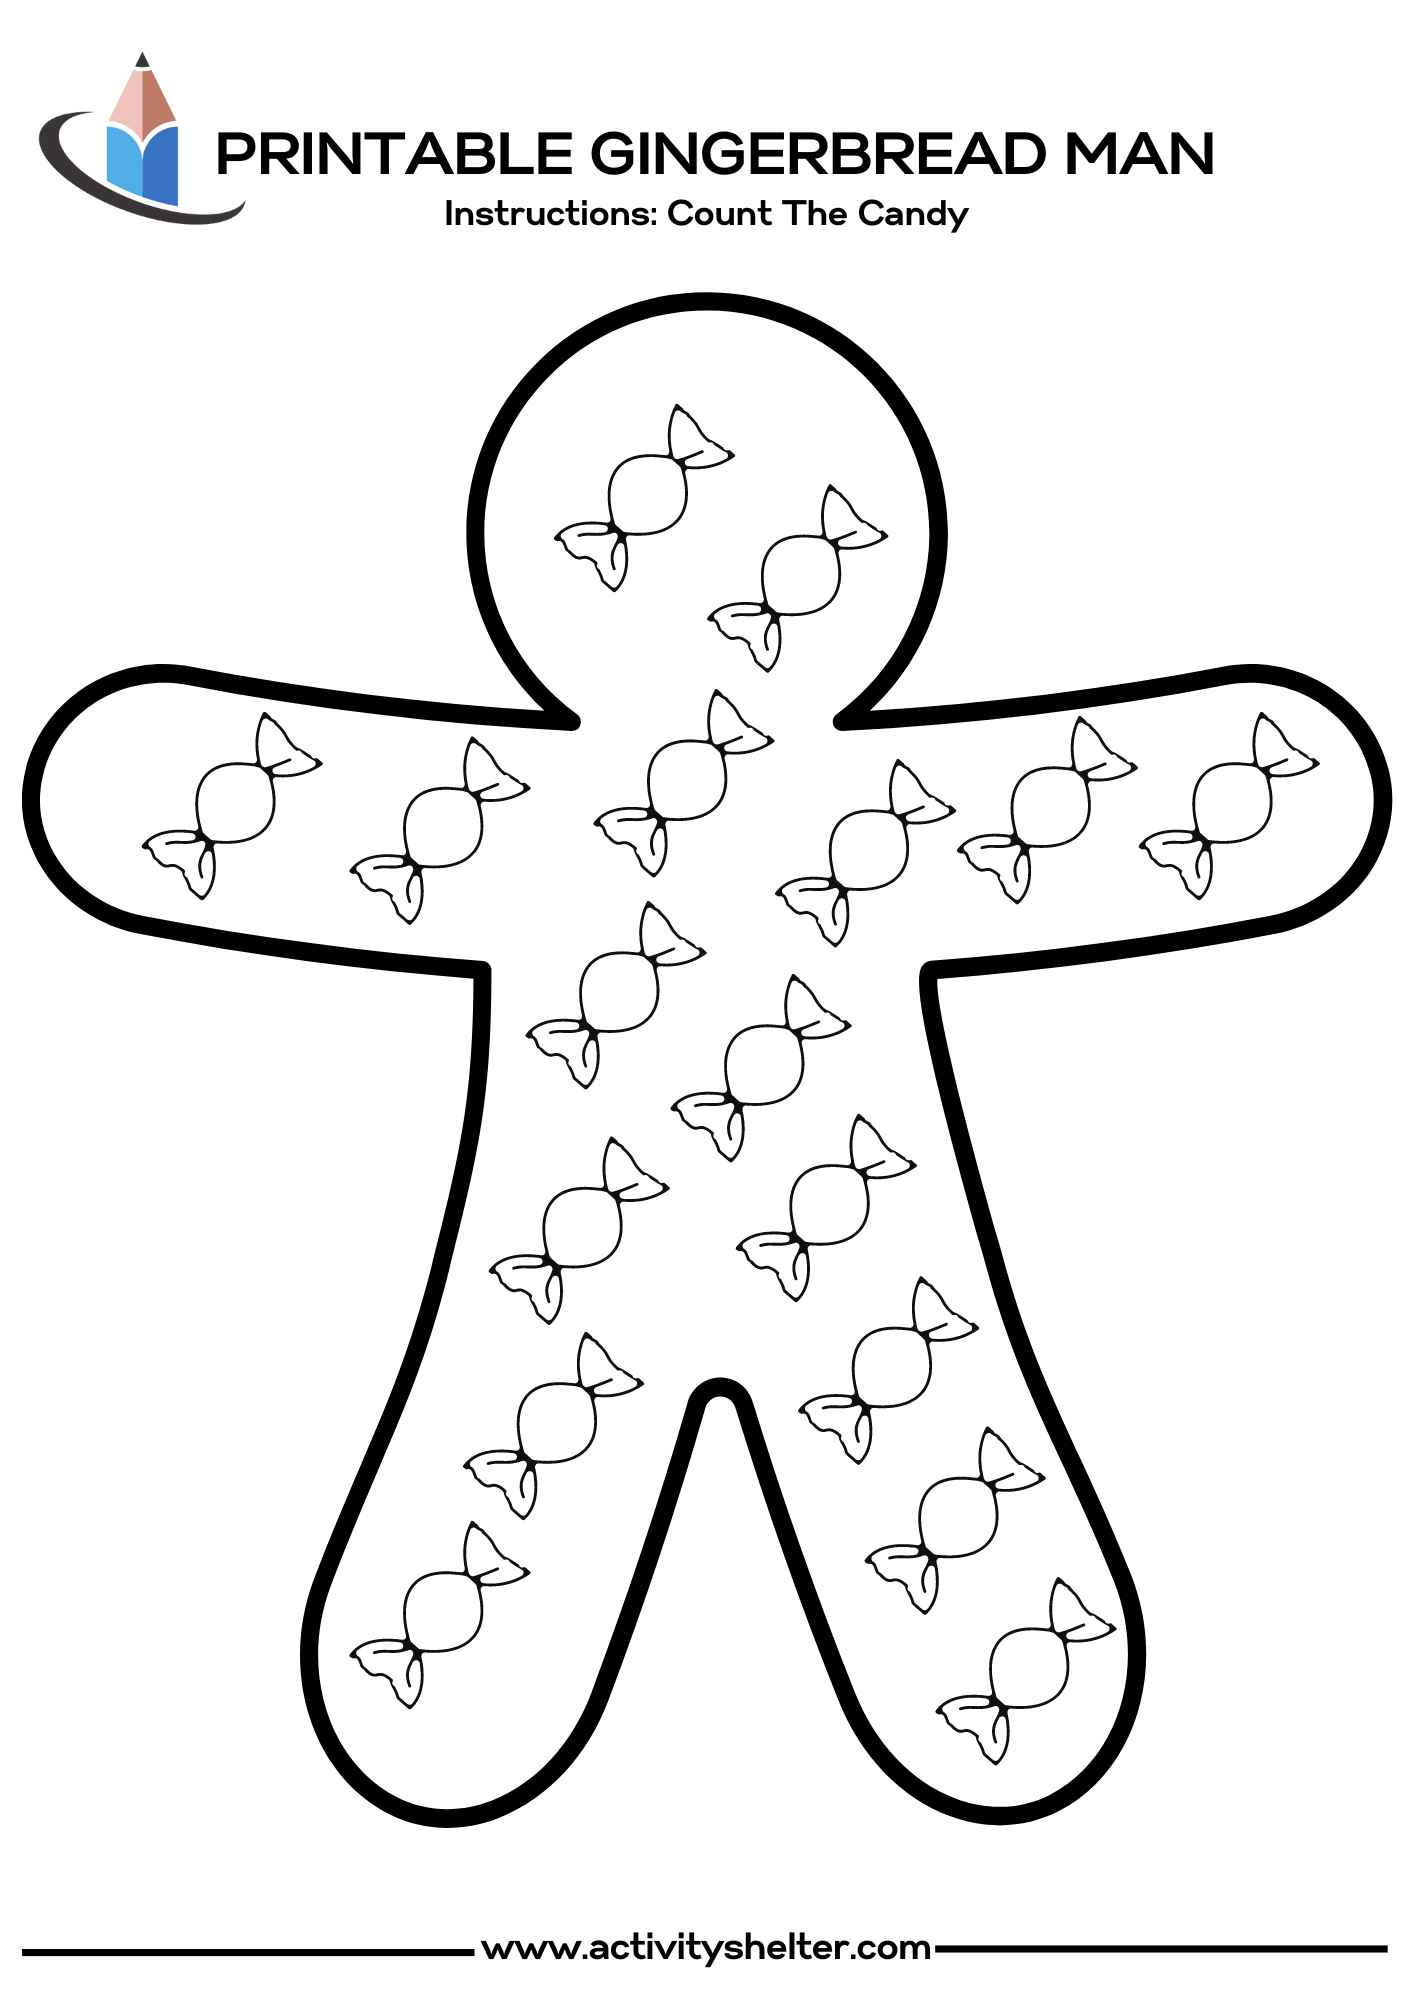 Free Printable Gingerbread Man Template Counting